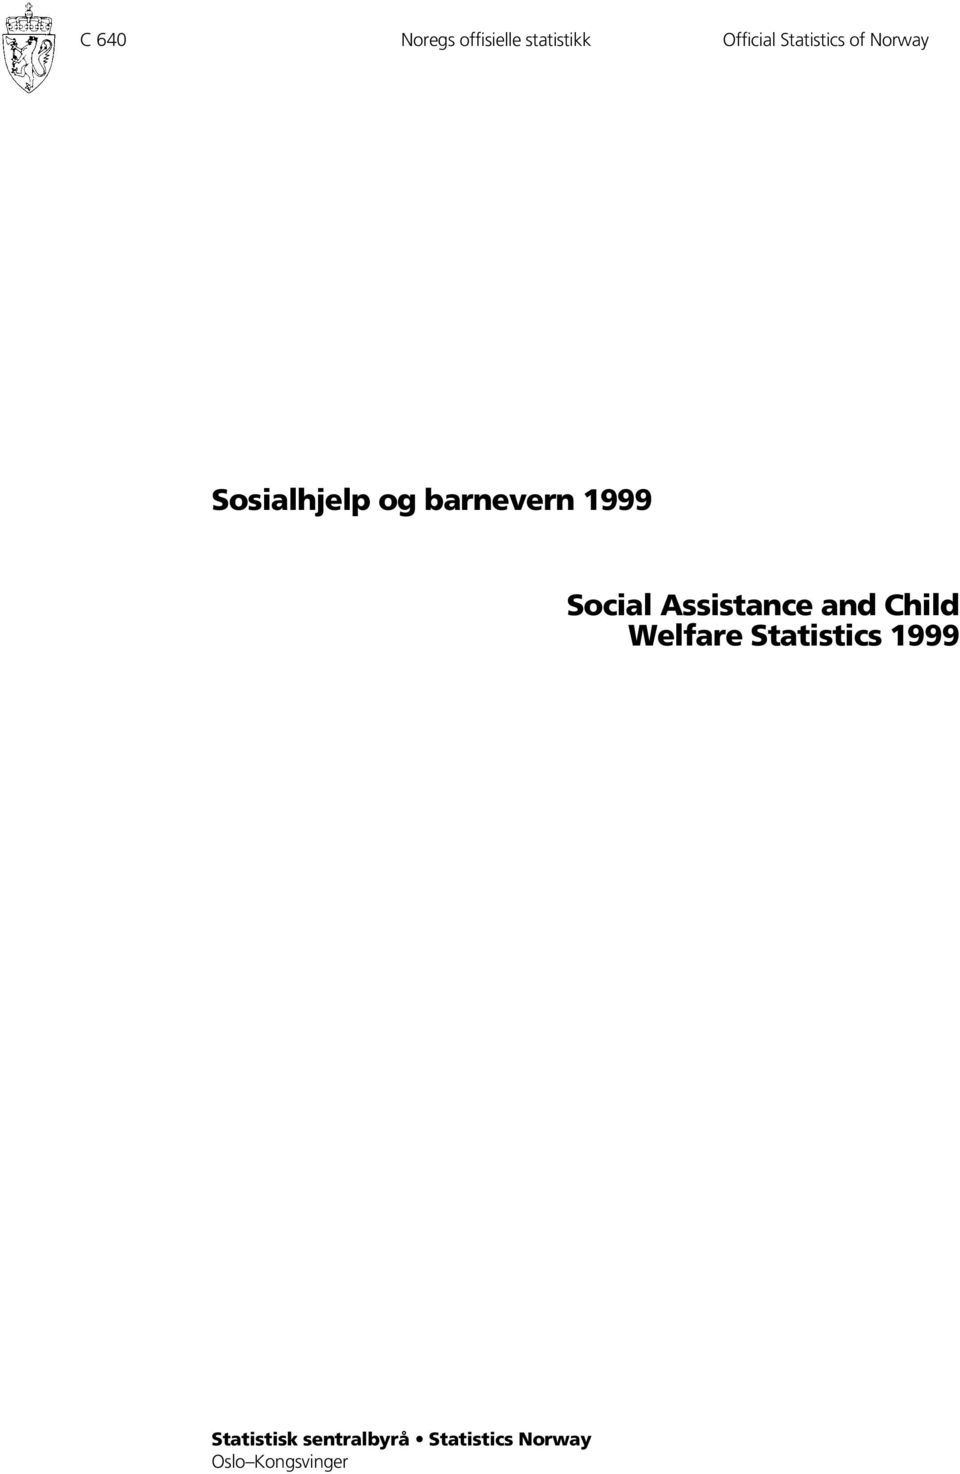 Social Assistance and Child Welfare Statistics